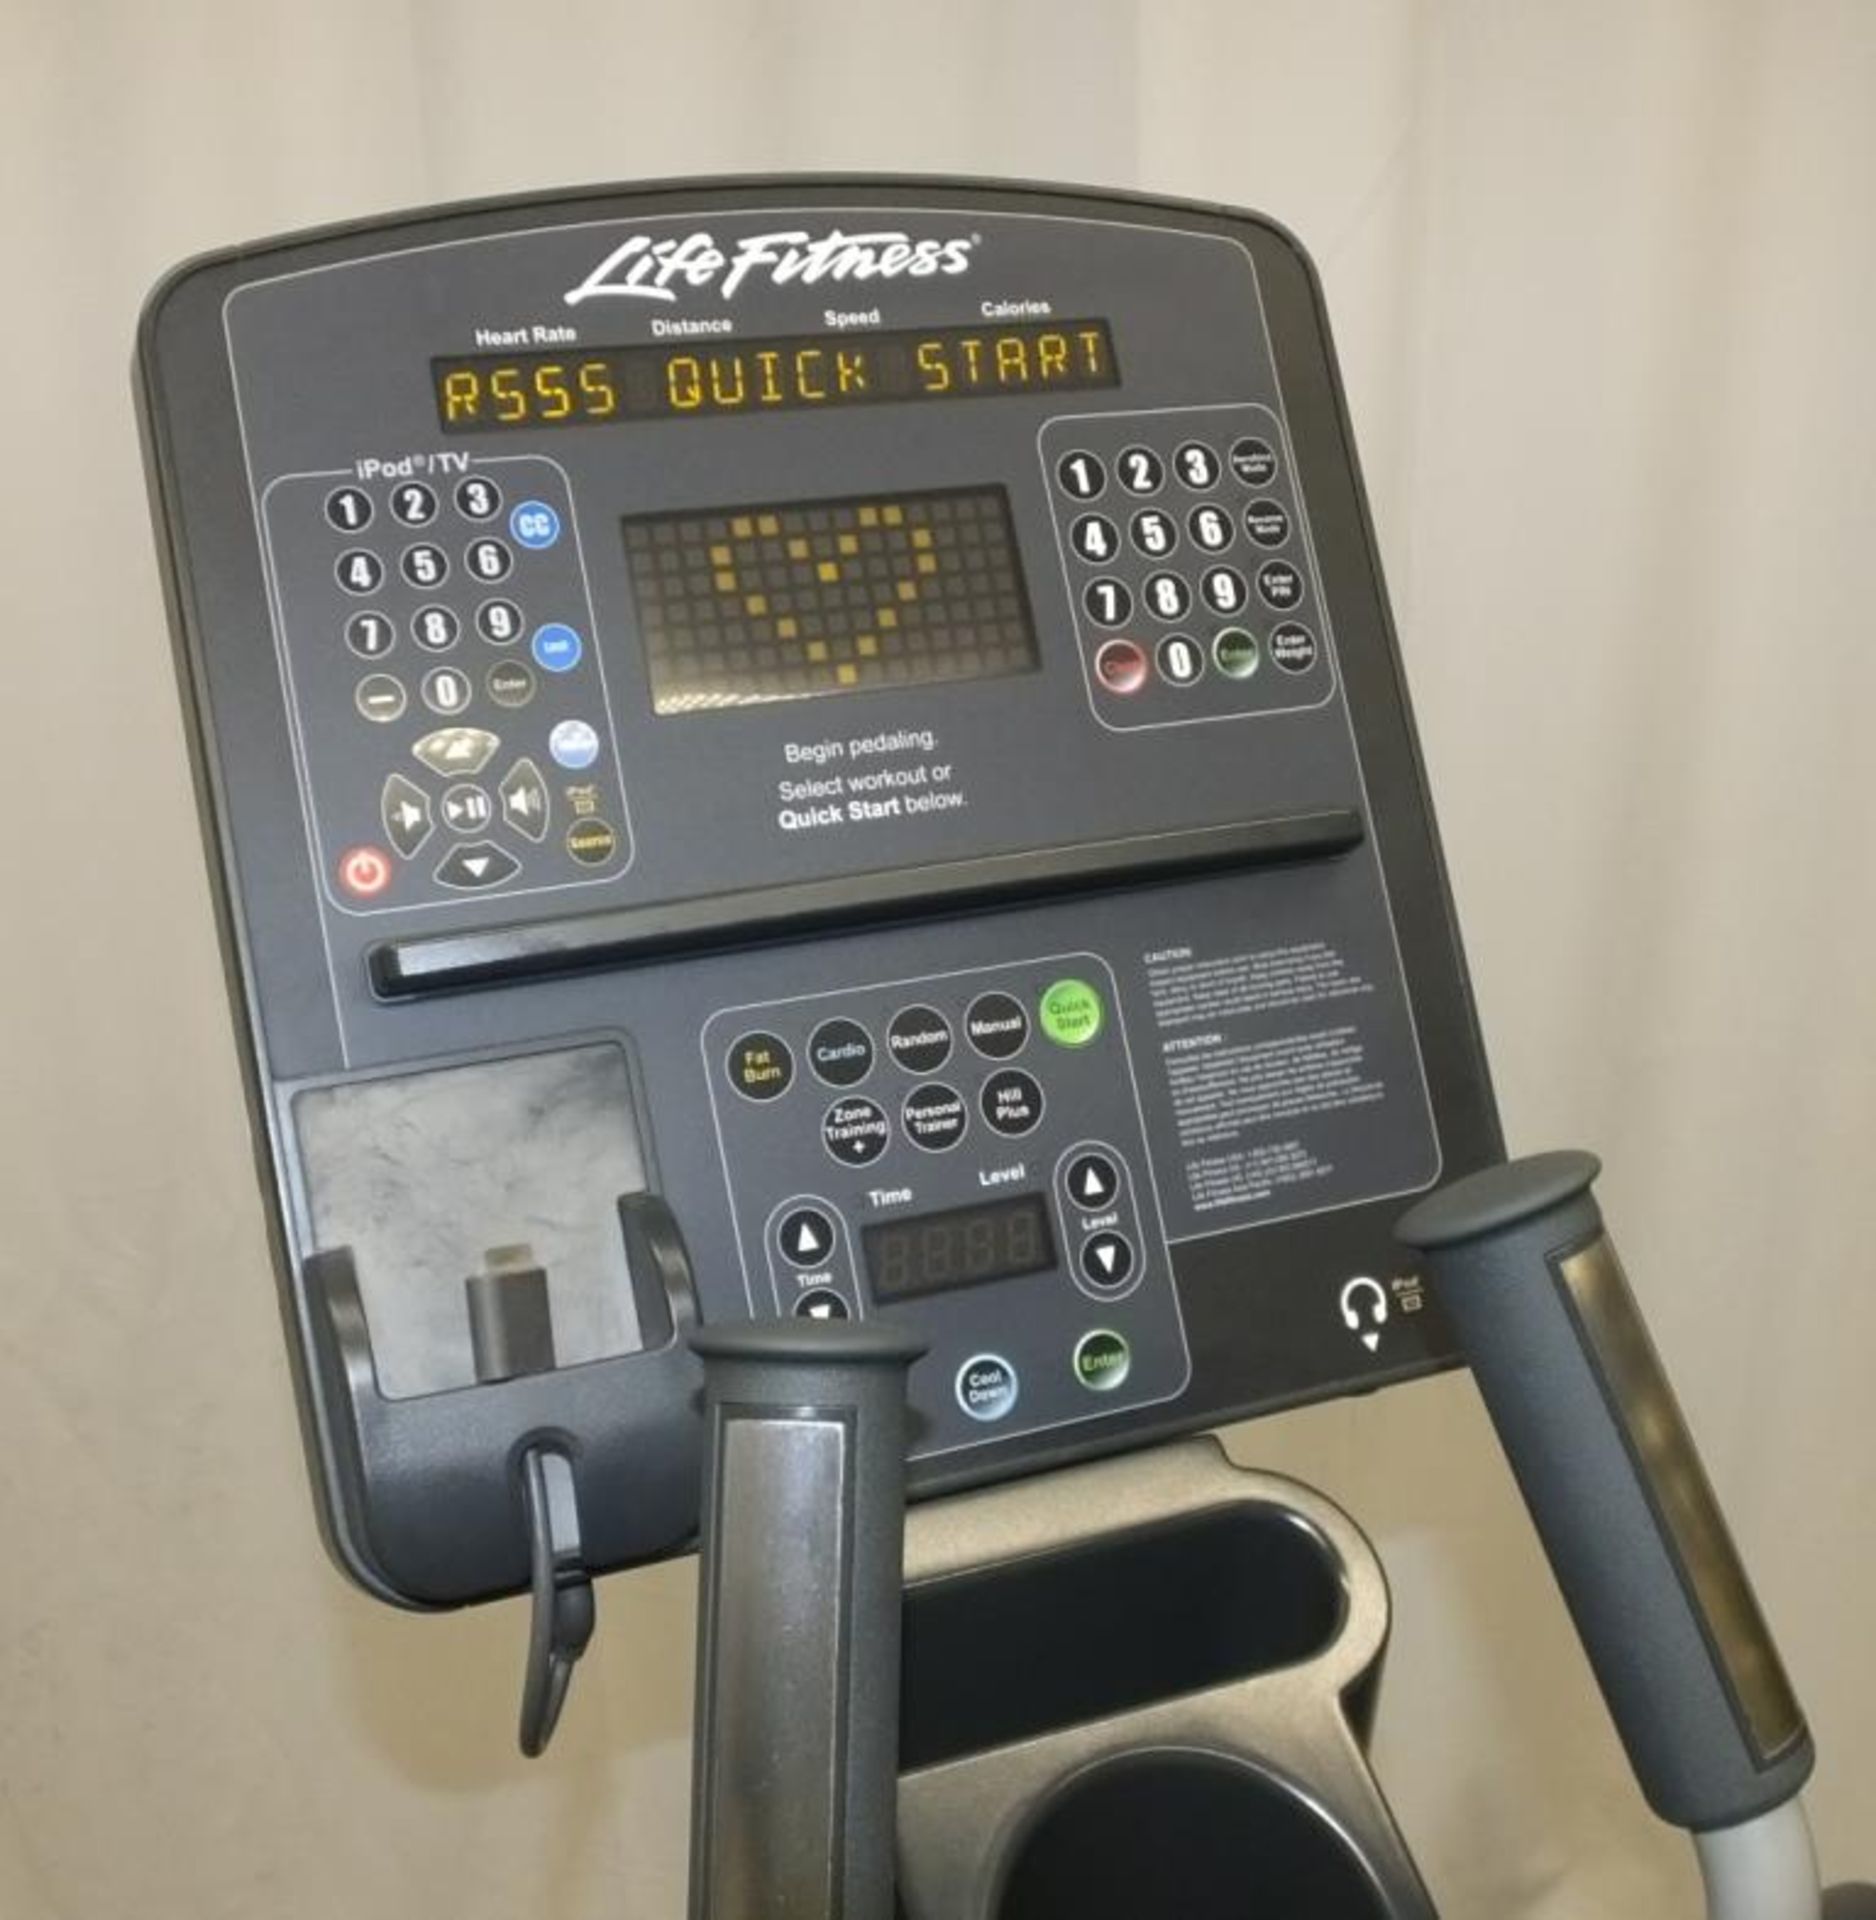 Life Fitness XHC Fit Stride Total Body Cross Trainer - powers up - functionality untested - Image 7 of 8